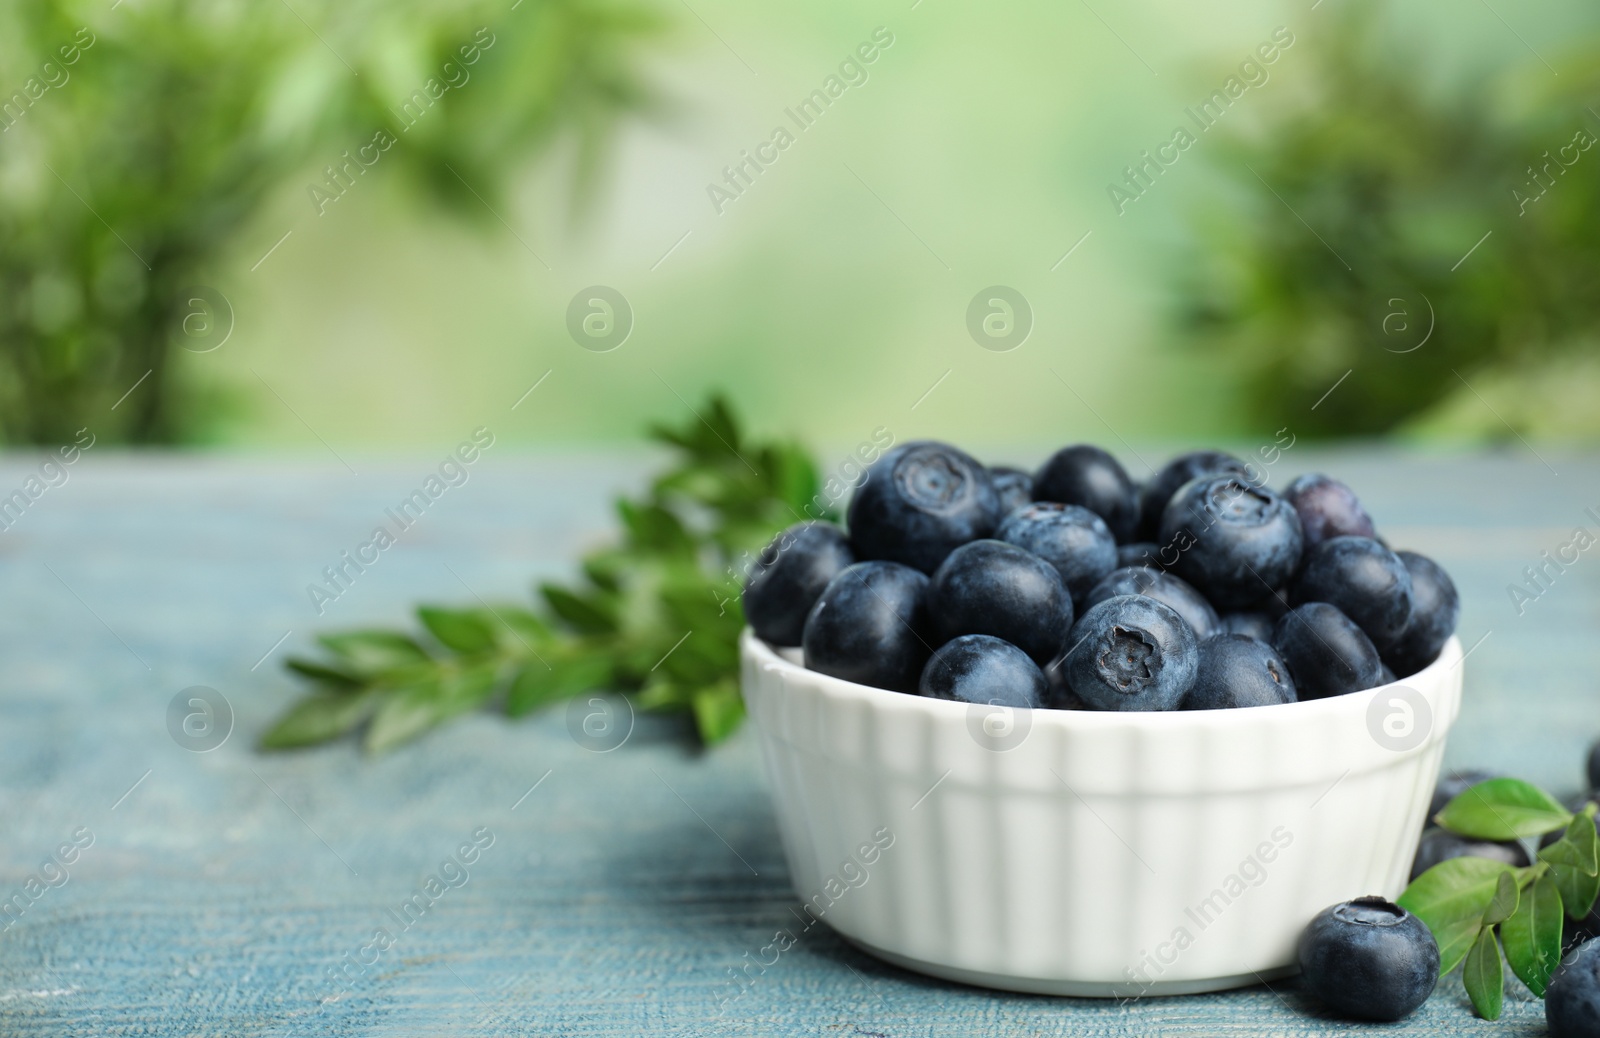 Photo of Bowl of tasty blueberries and leaves on wooden table against blurred green background, space for text